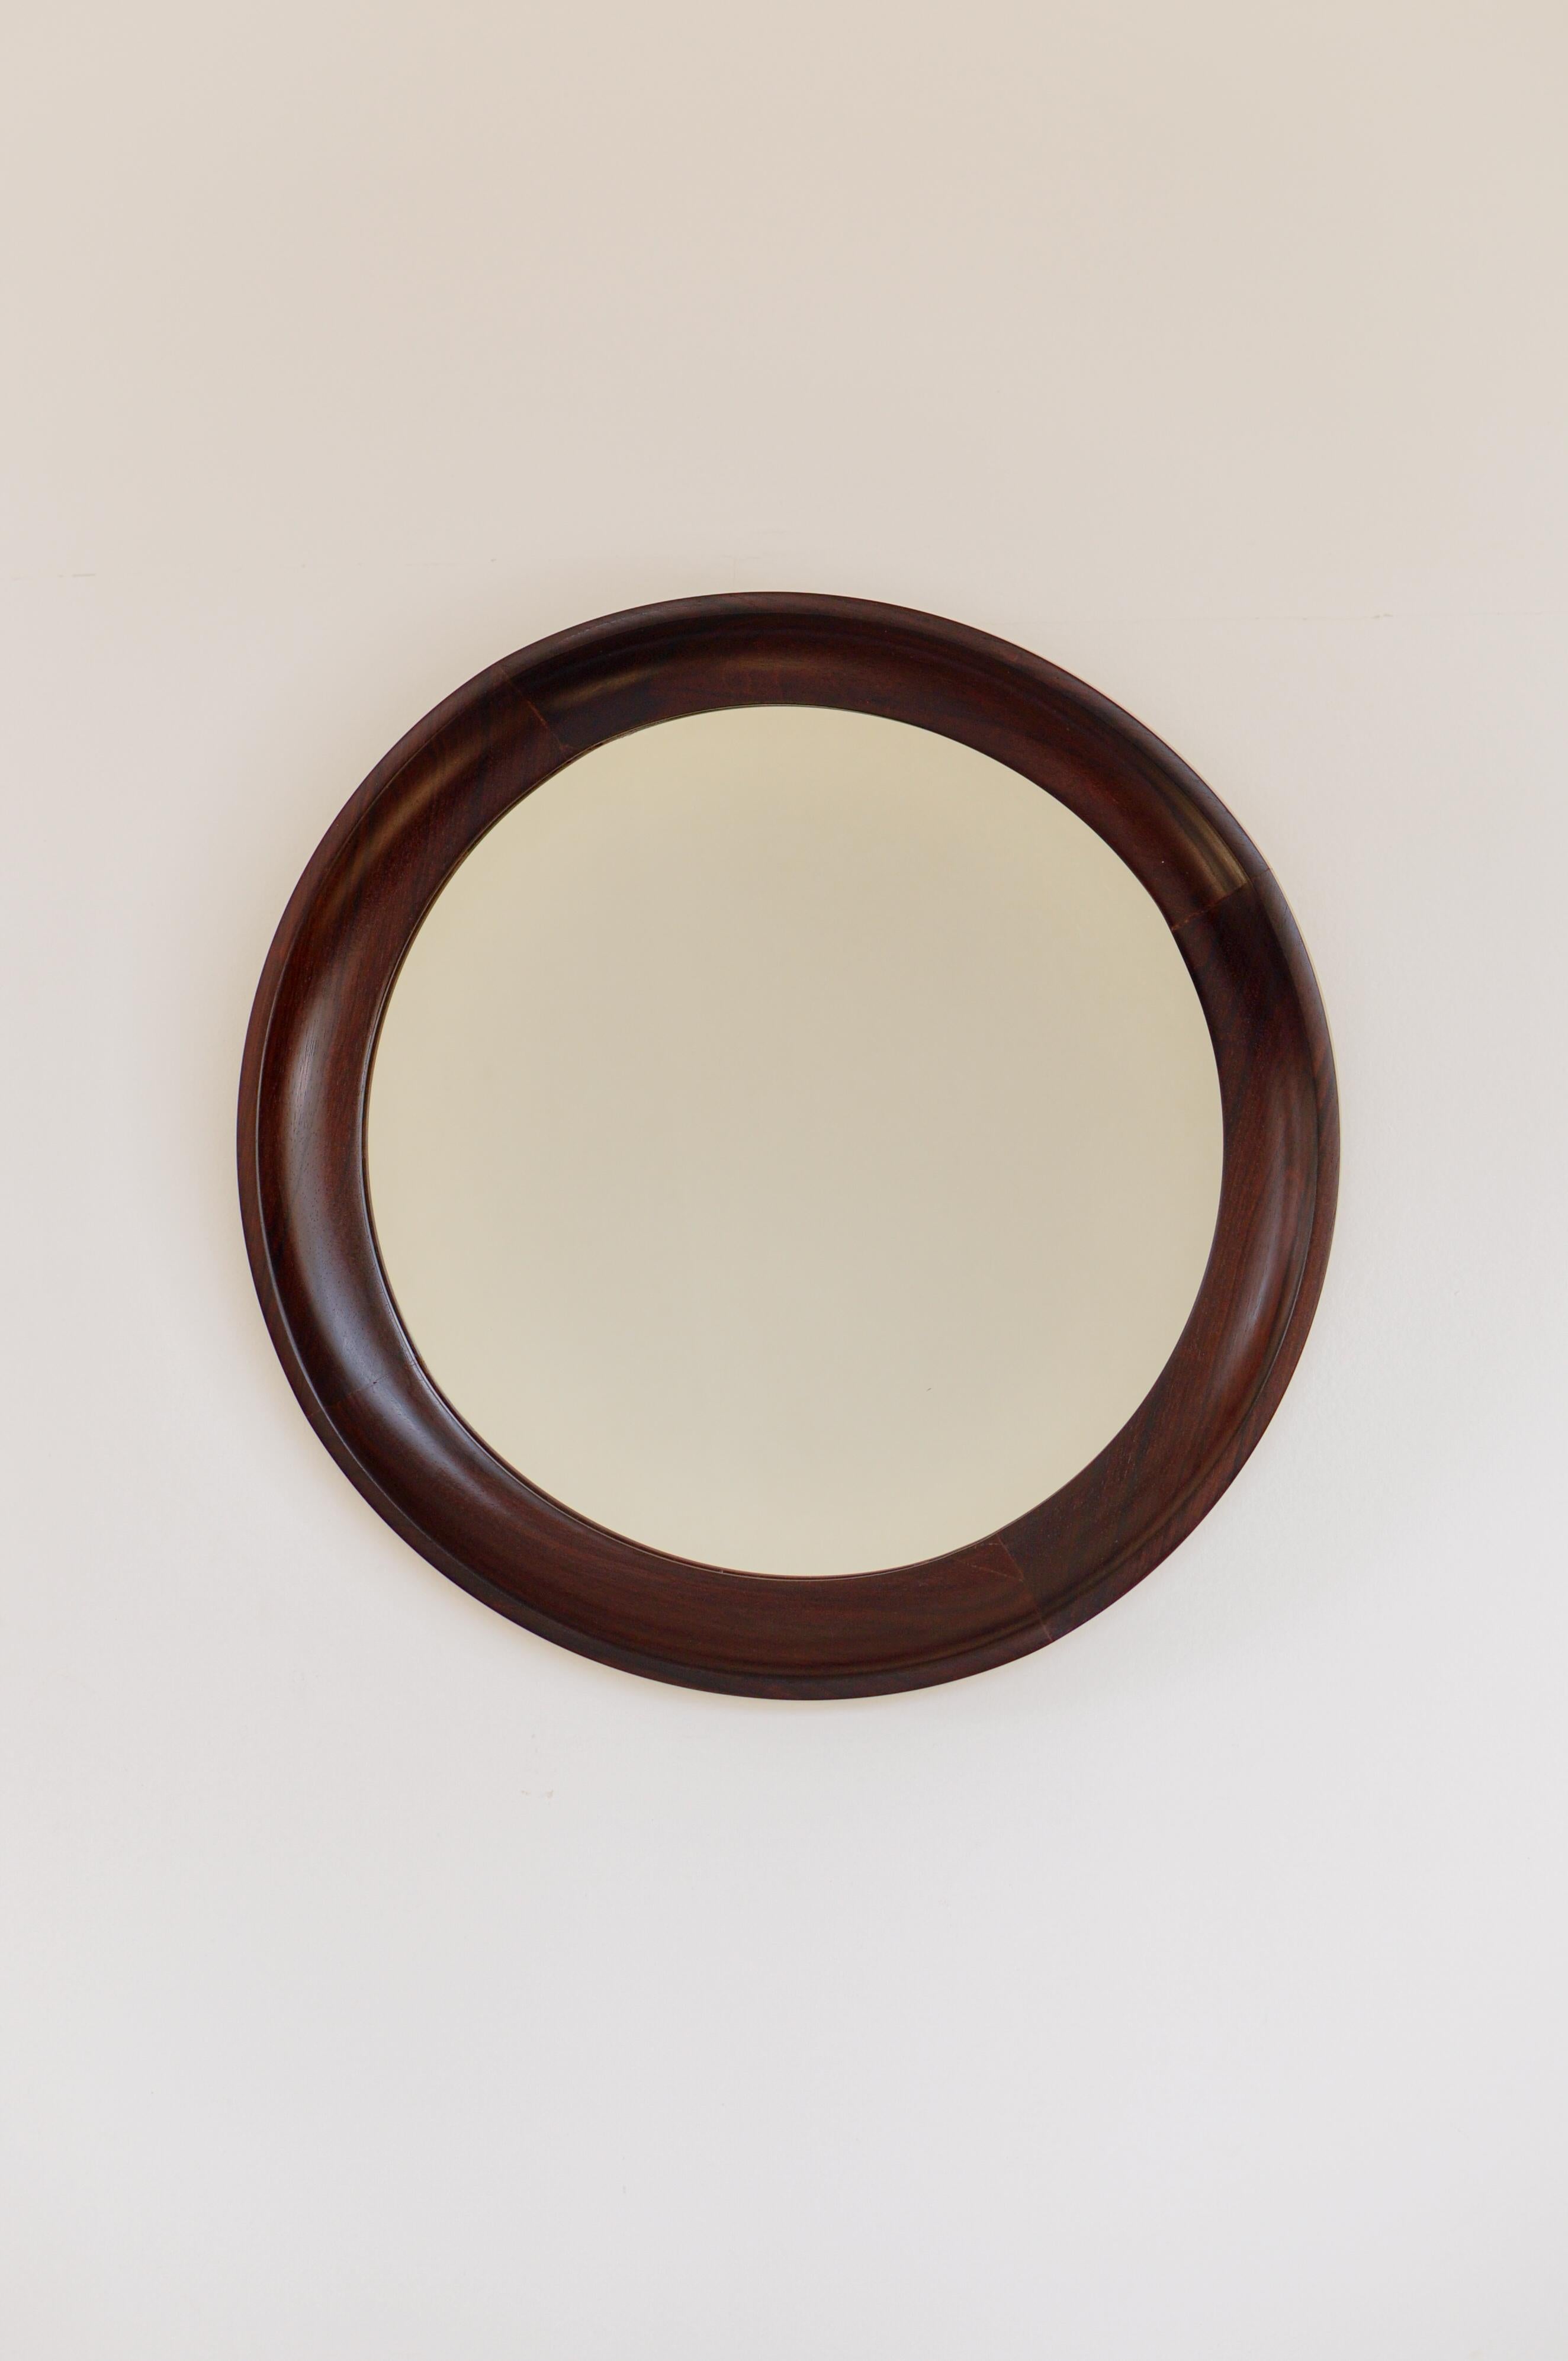 Round mirror with Brazilian rosewood frame. It retains the seal of 